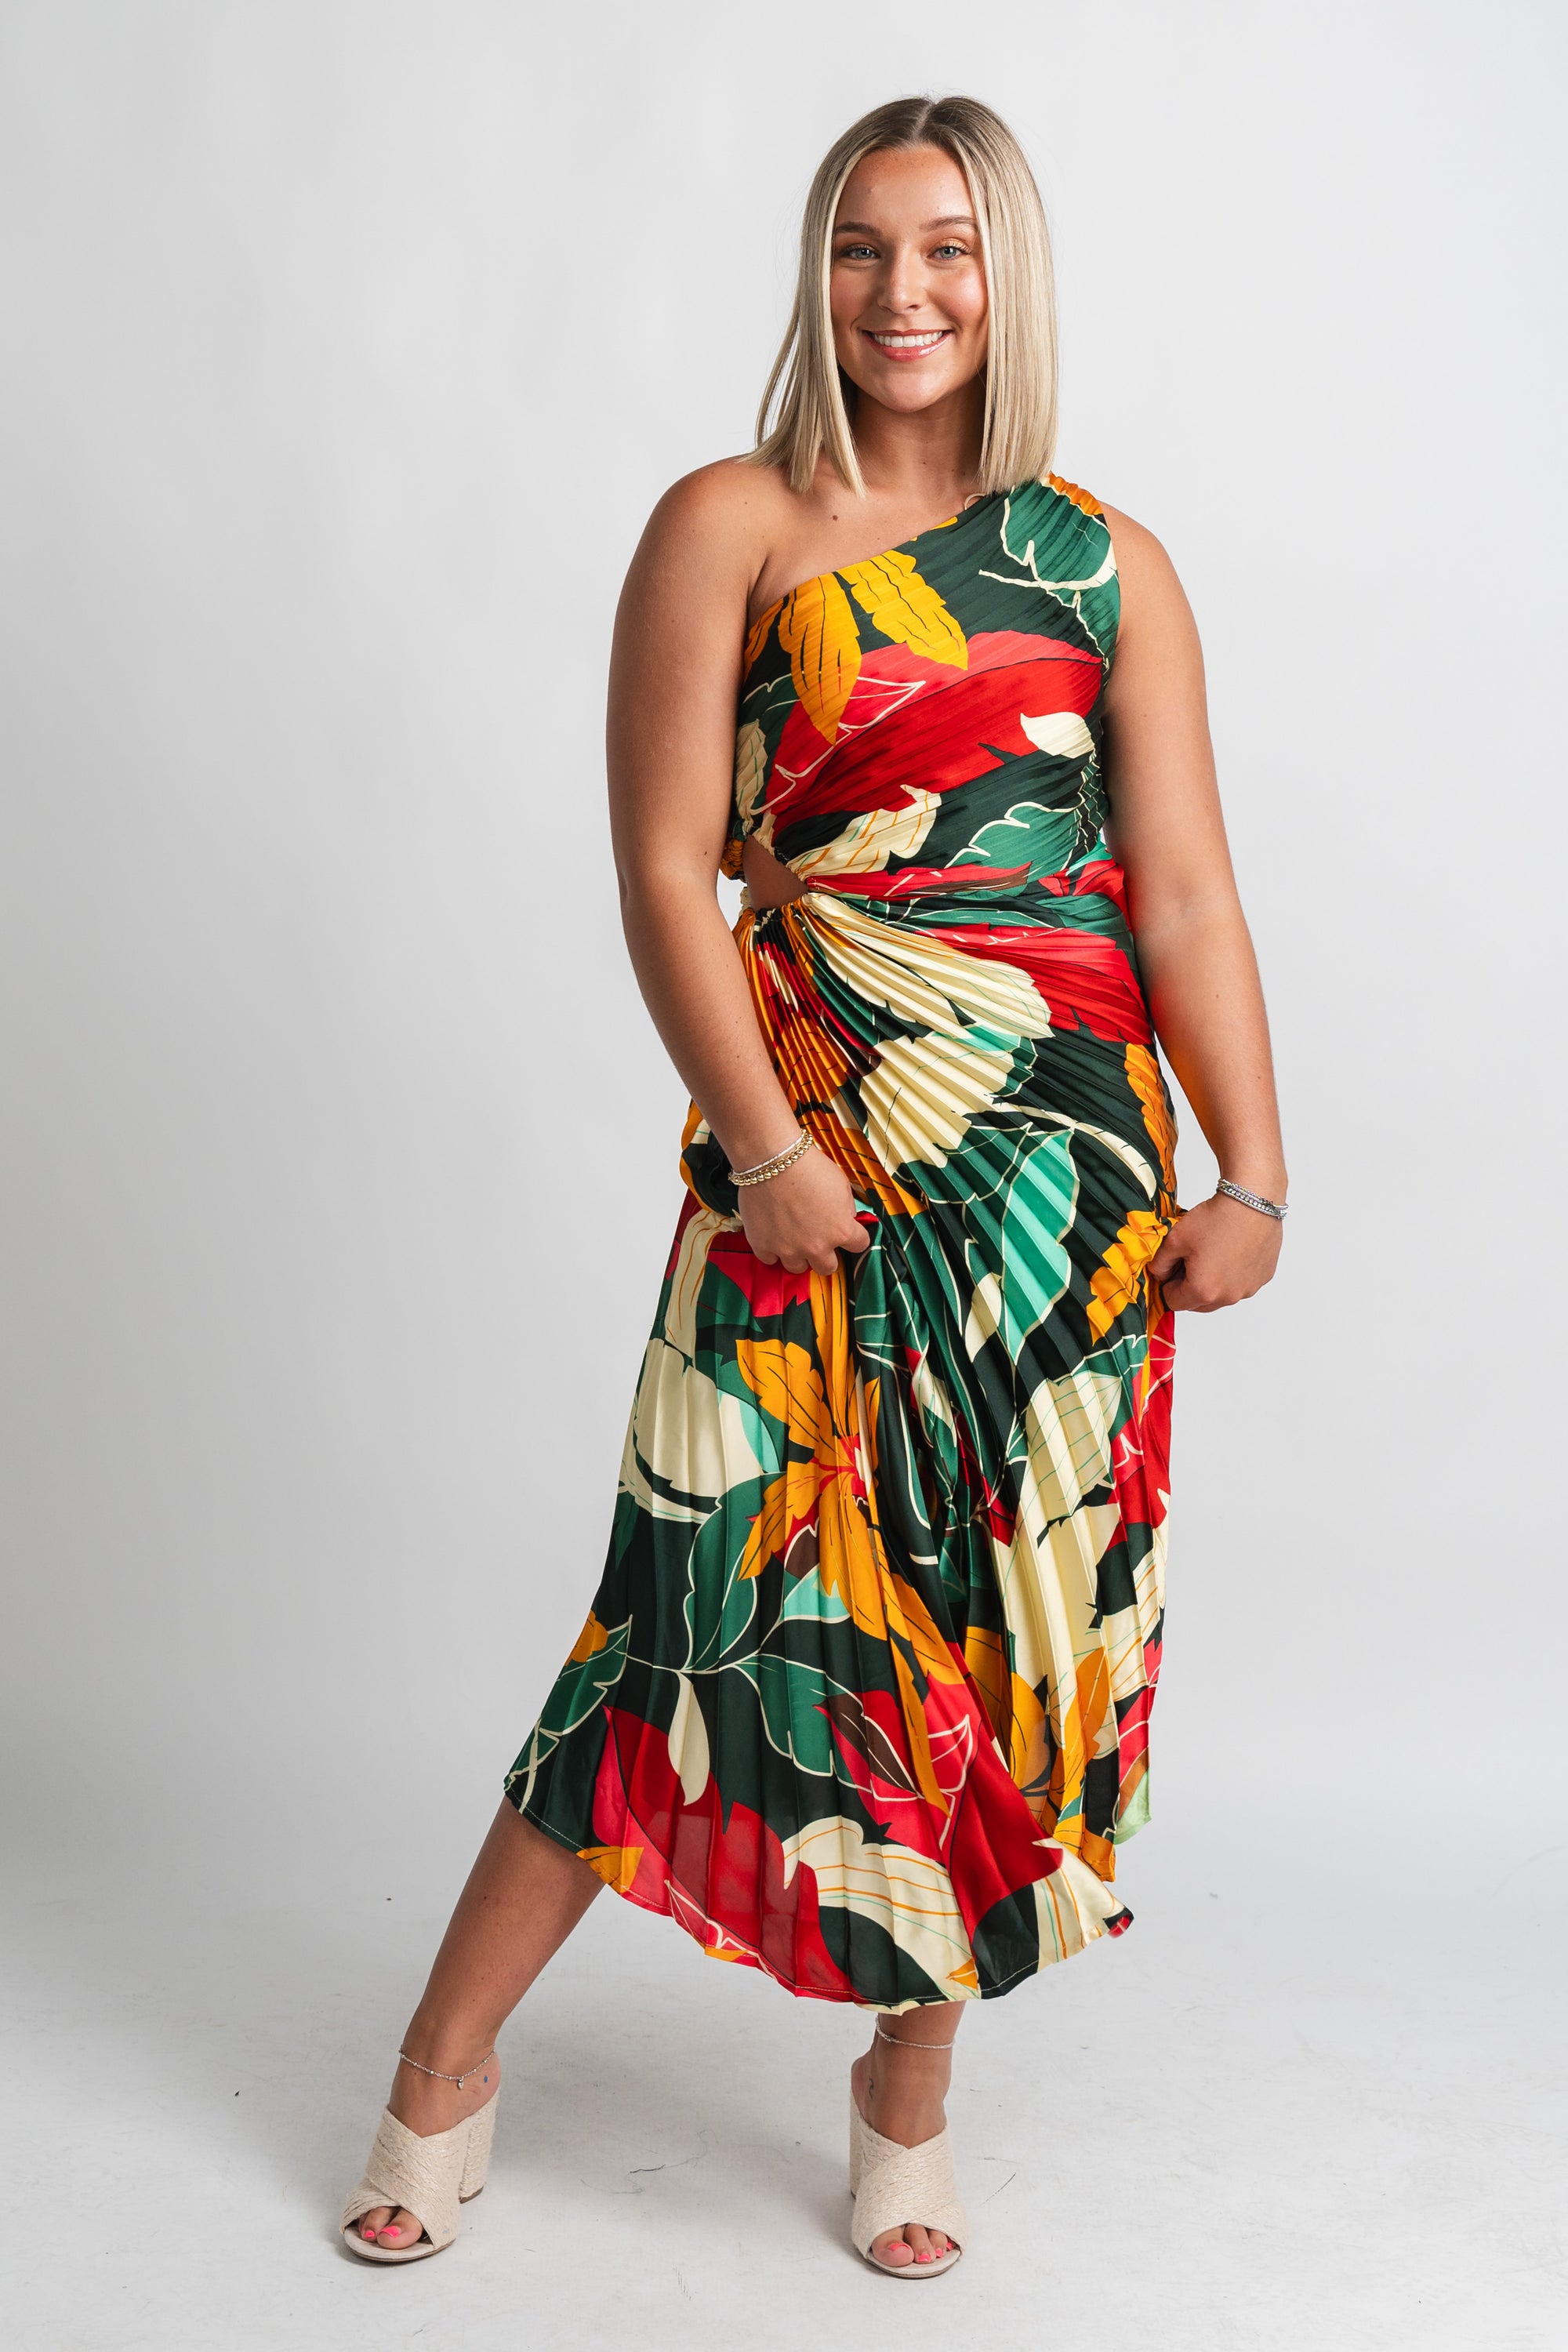 Tropical pleated maxi dress rio paradise - Stylish dress - Trendy Staycation Outfits at Lush Fashion Lounge Boutique in Oklahoma City